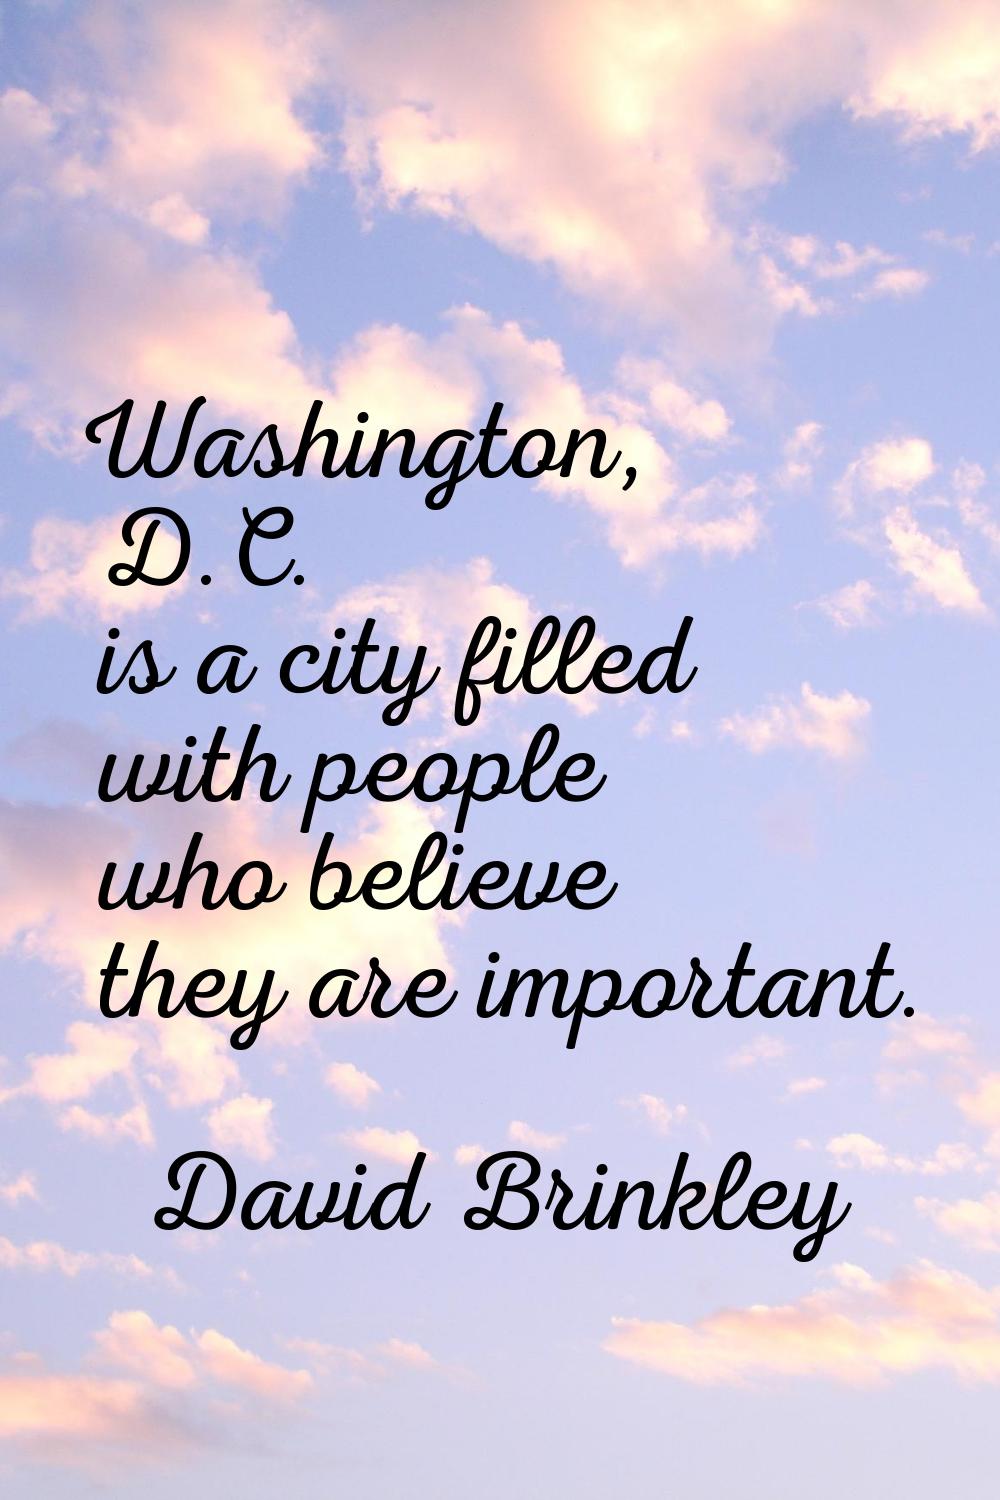 Washington, D.C. is a city filled with people who believe they are important.